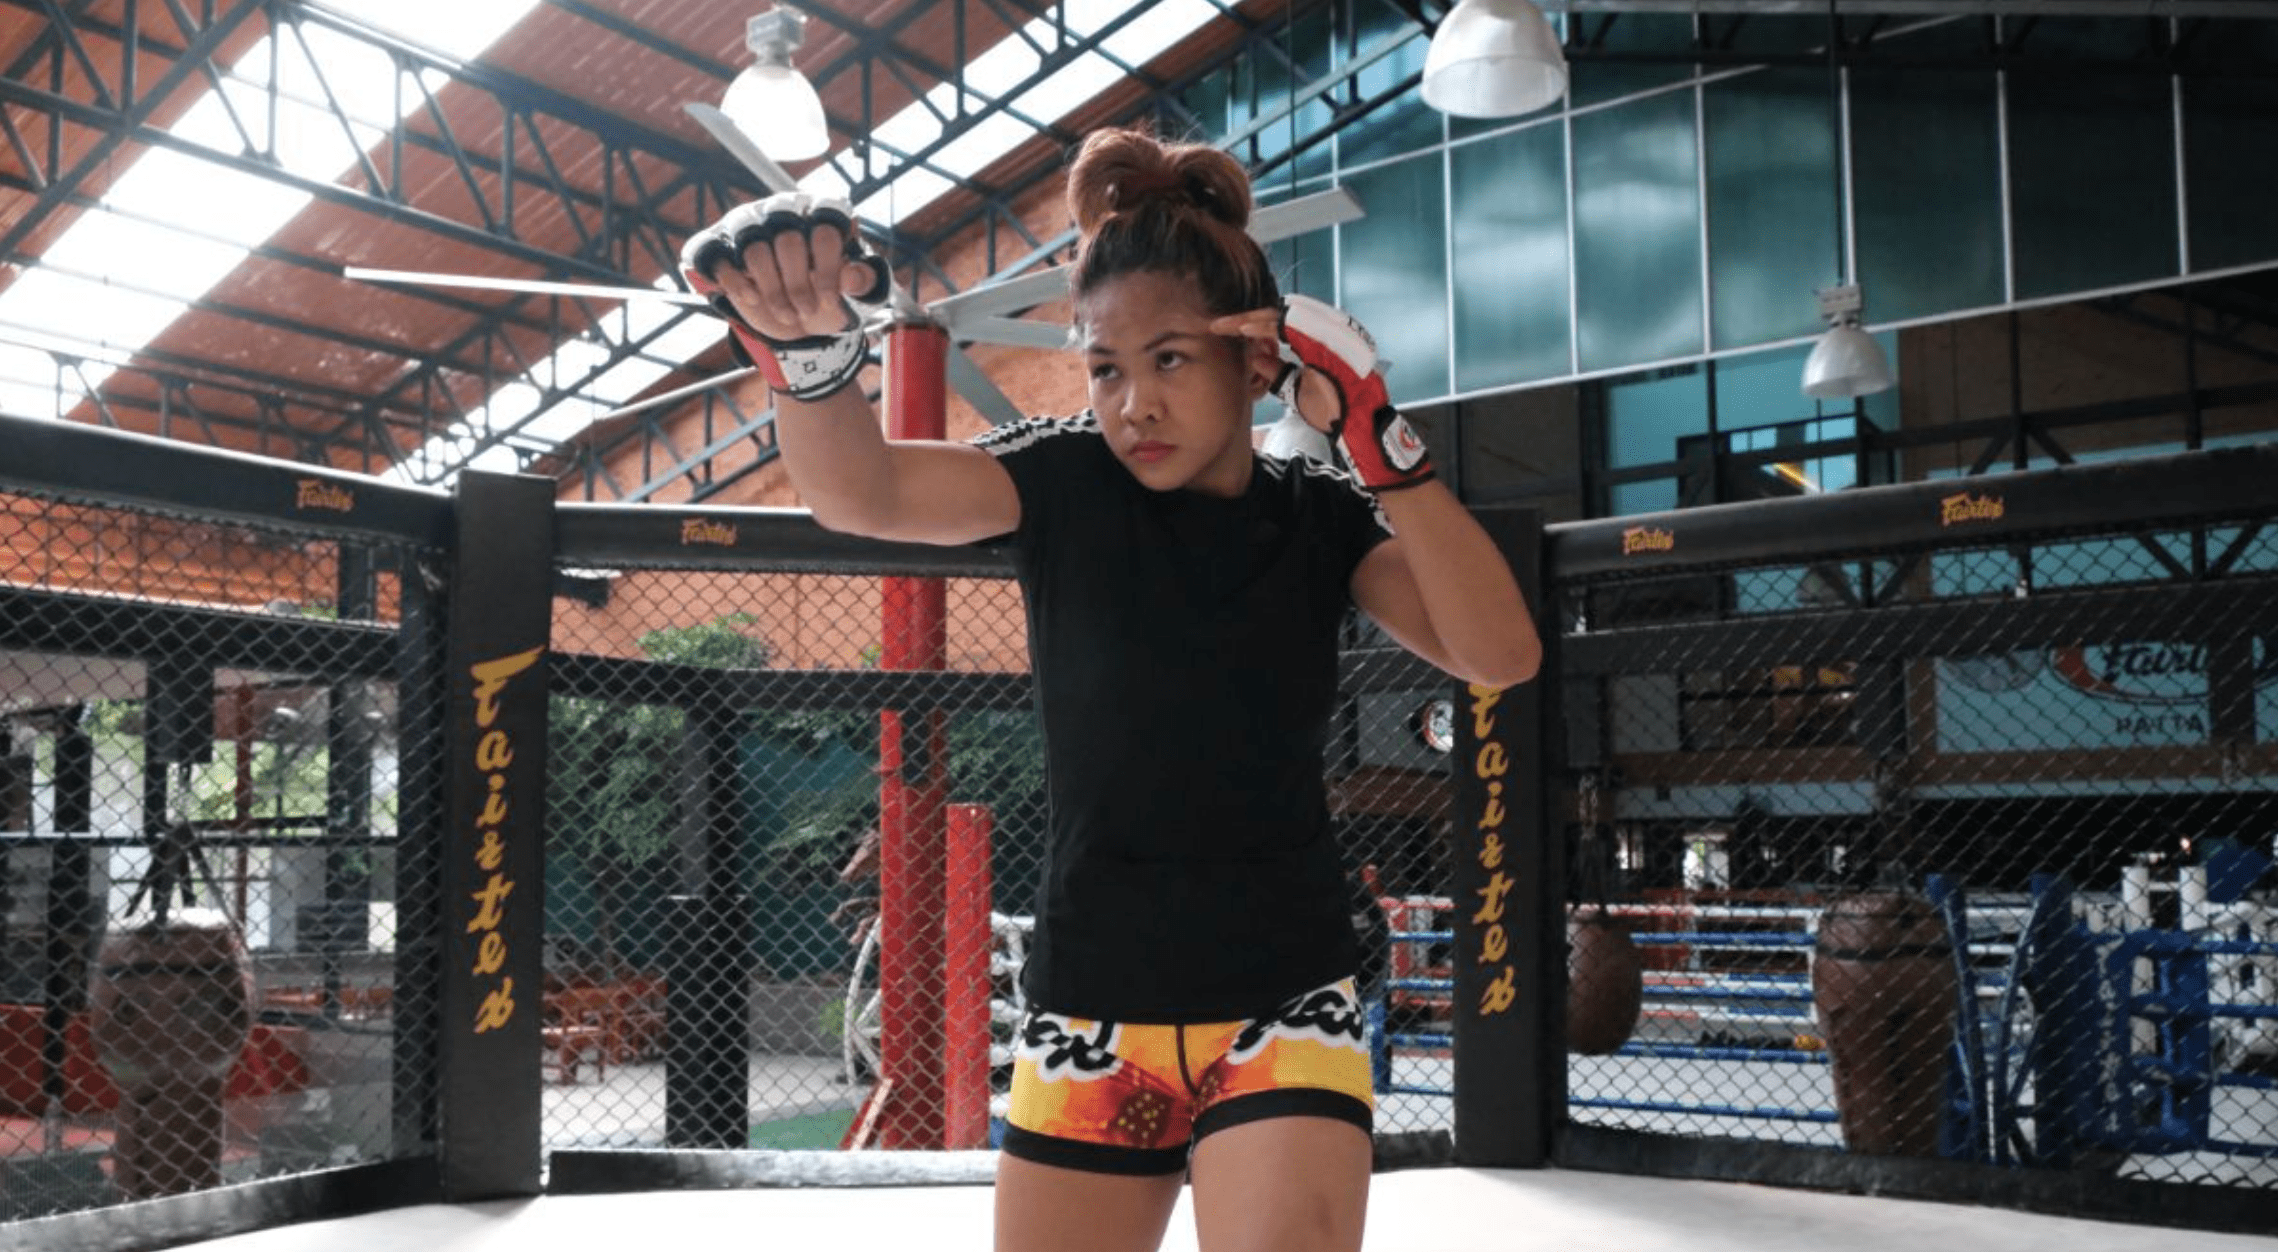 Zamboanga Excited To Showcase Skills Honed In Thailand In ONE Debut